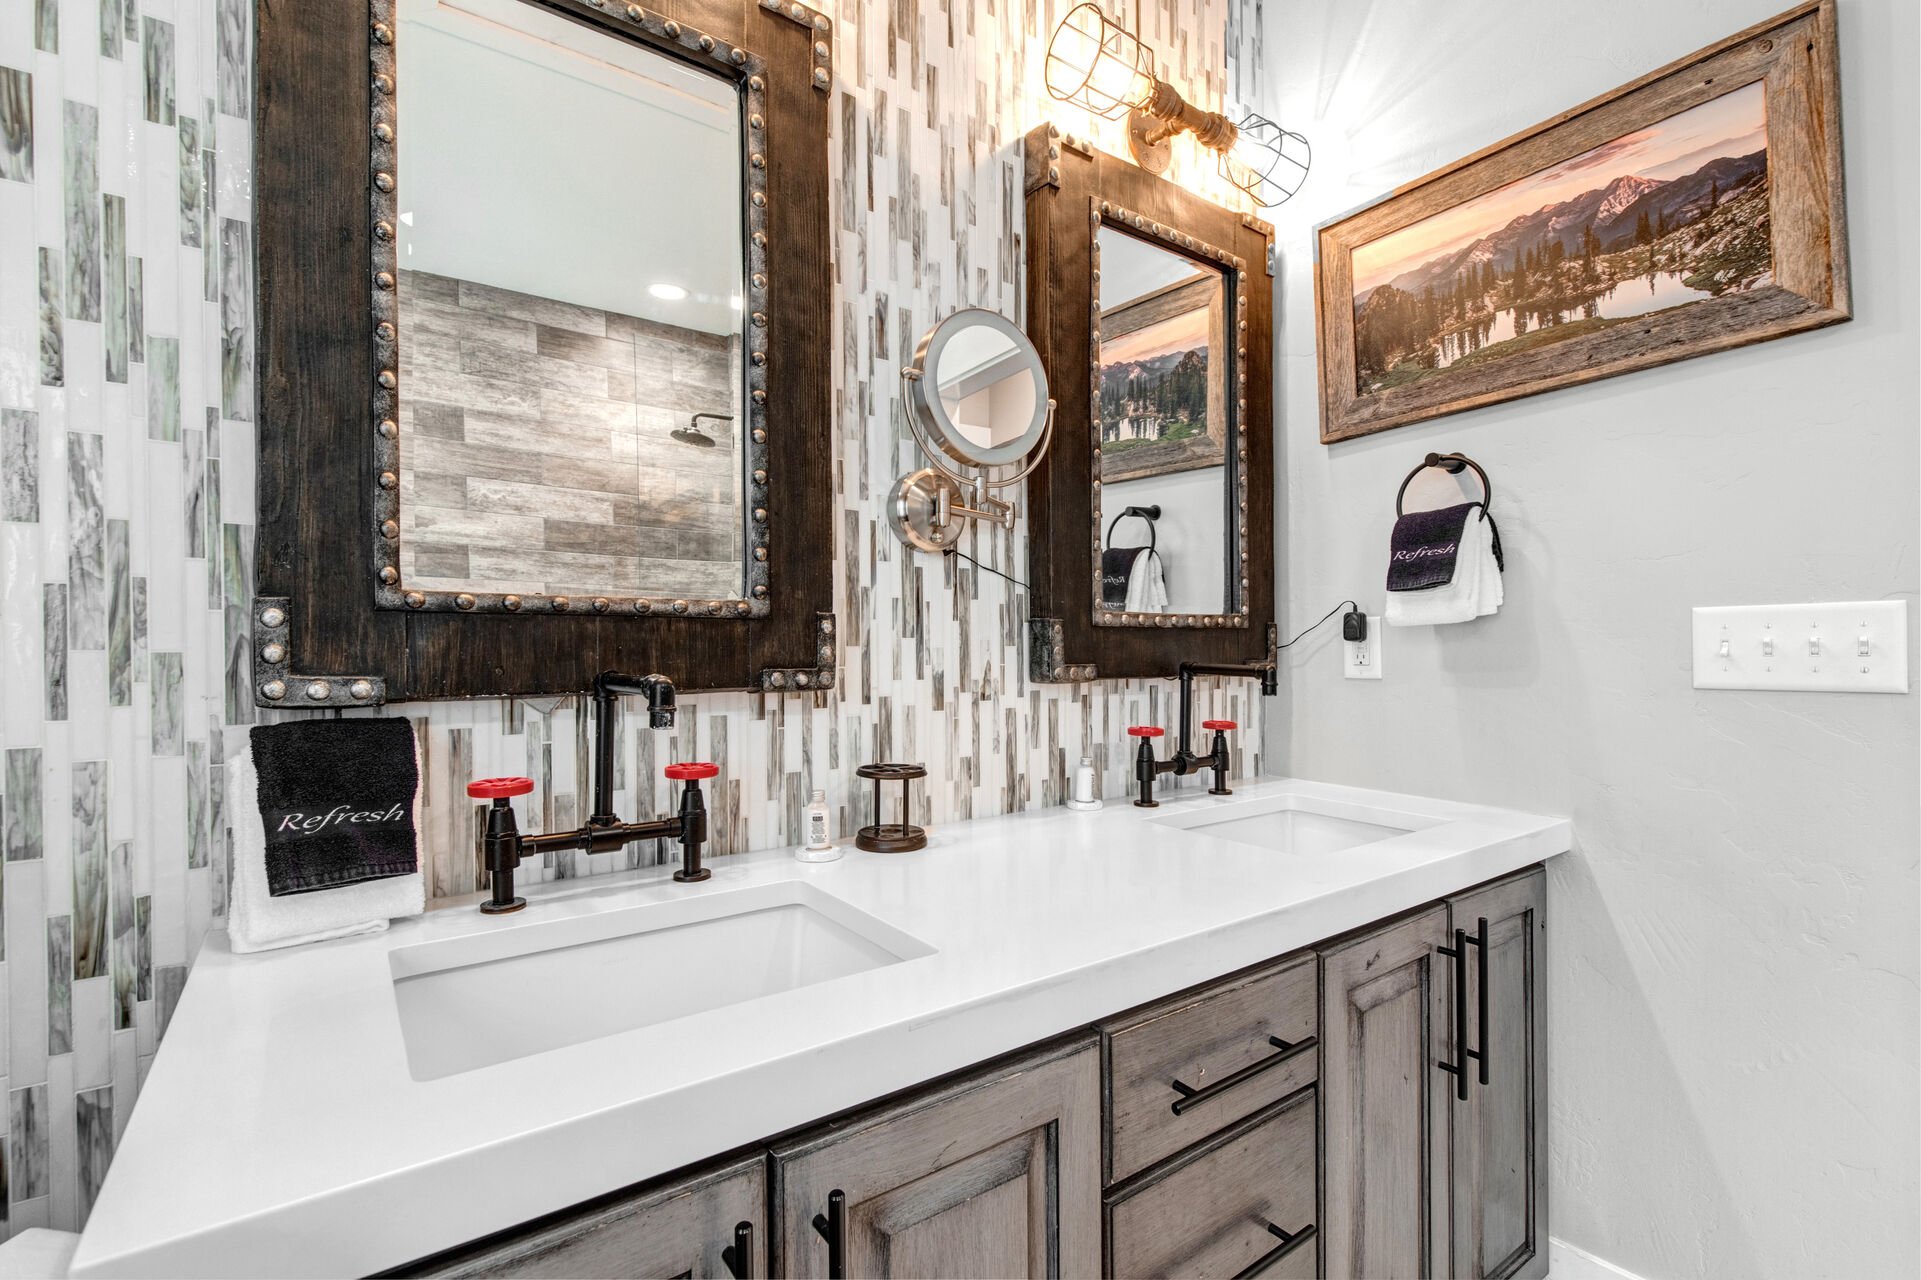 Master Bath with Two Sinks